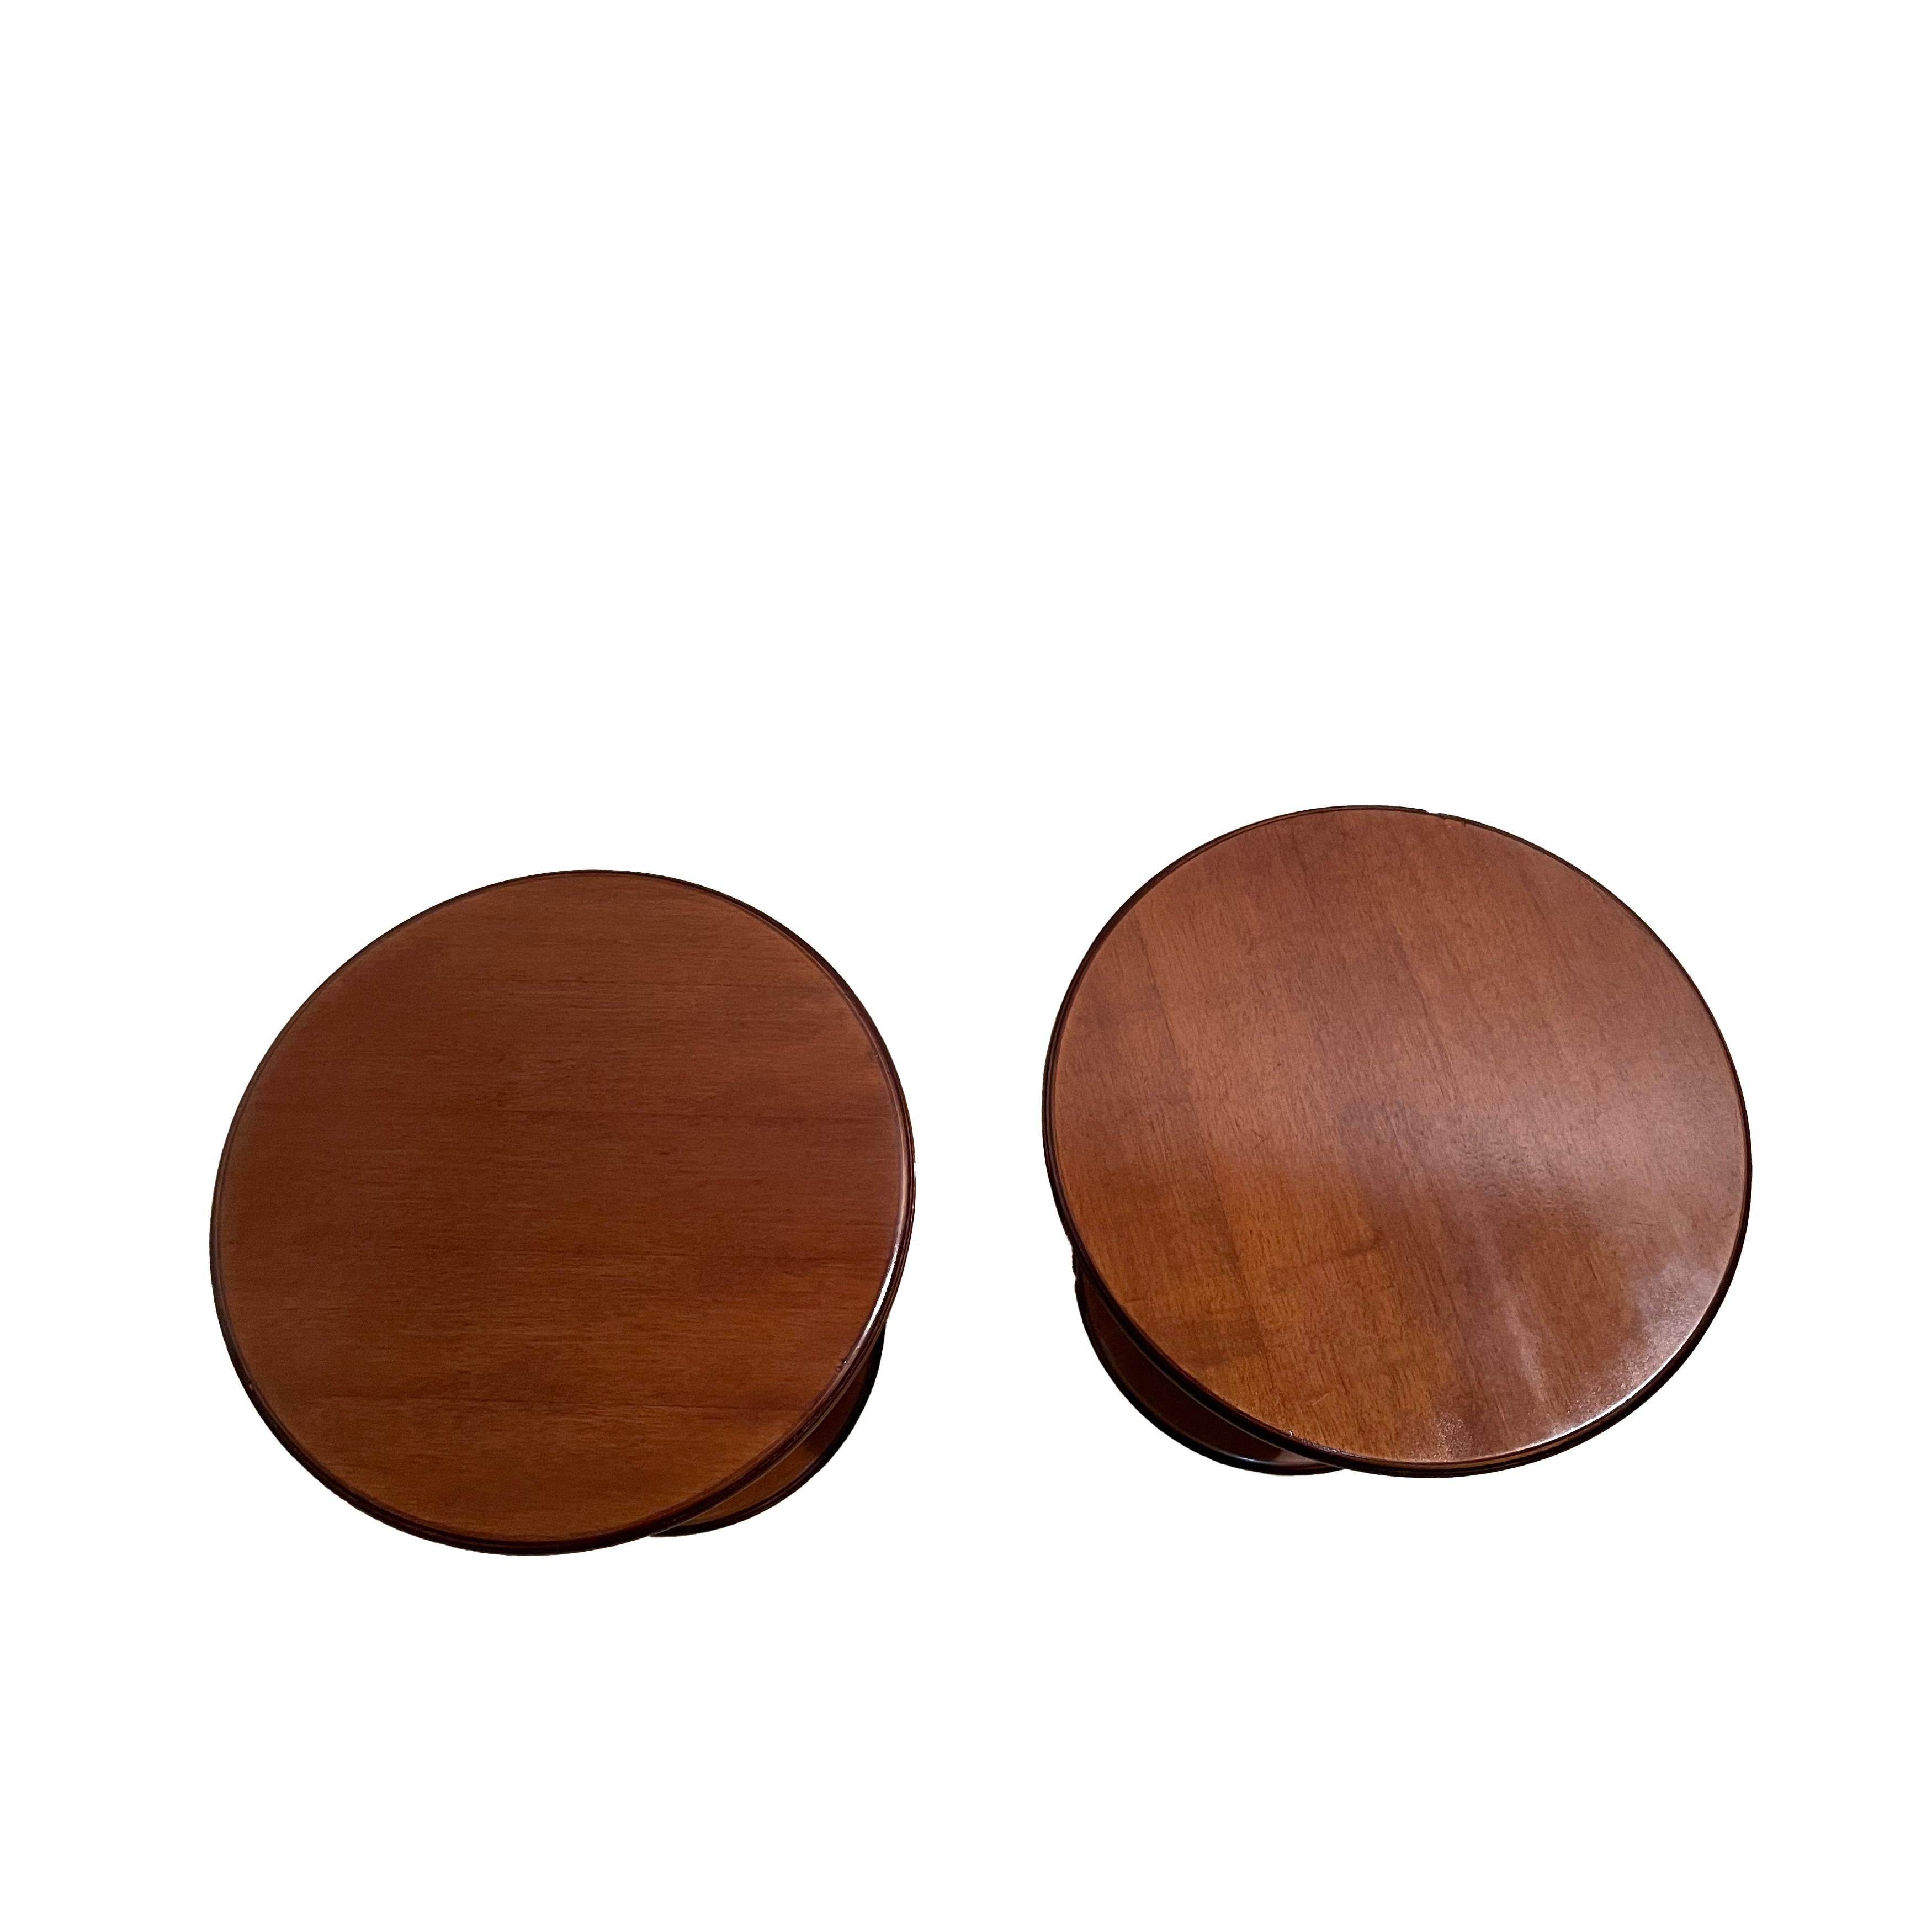 Ettore Sottsass Walnut Rocchetto Side Table for Poltronova, 1964, Set of 2  In Good Condition For Sale In Vicenza, IT